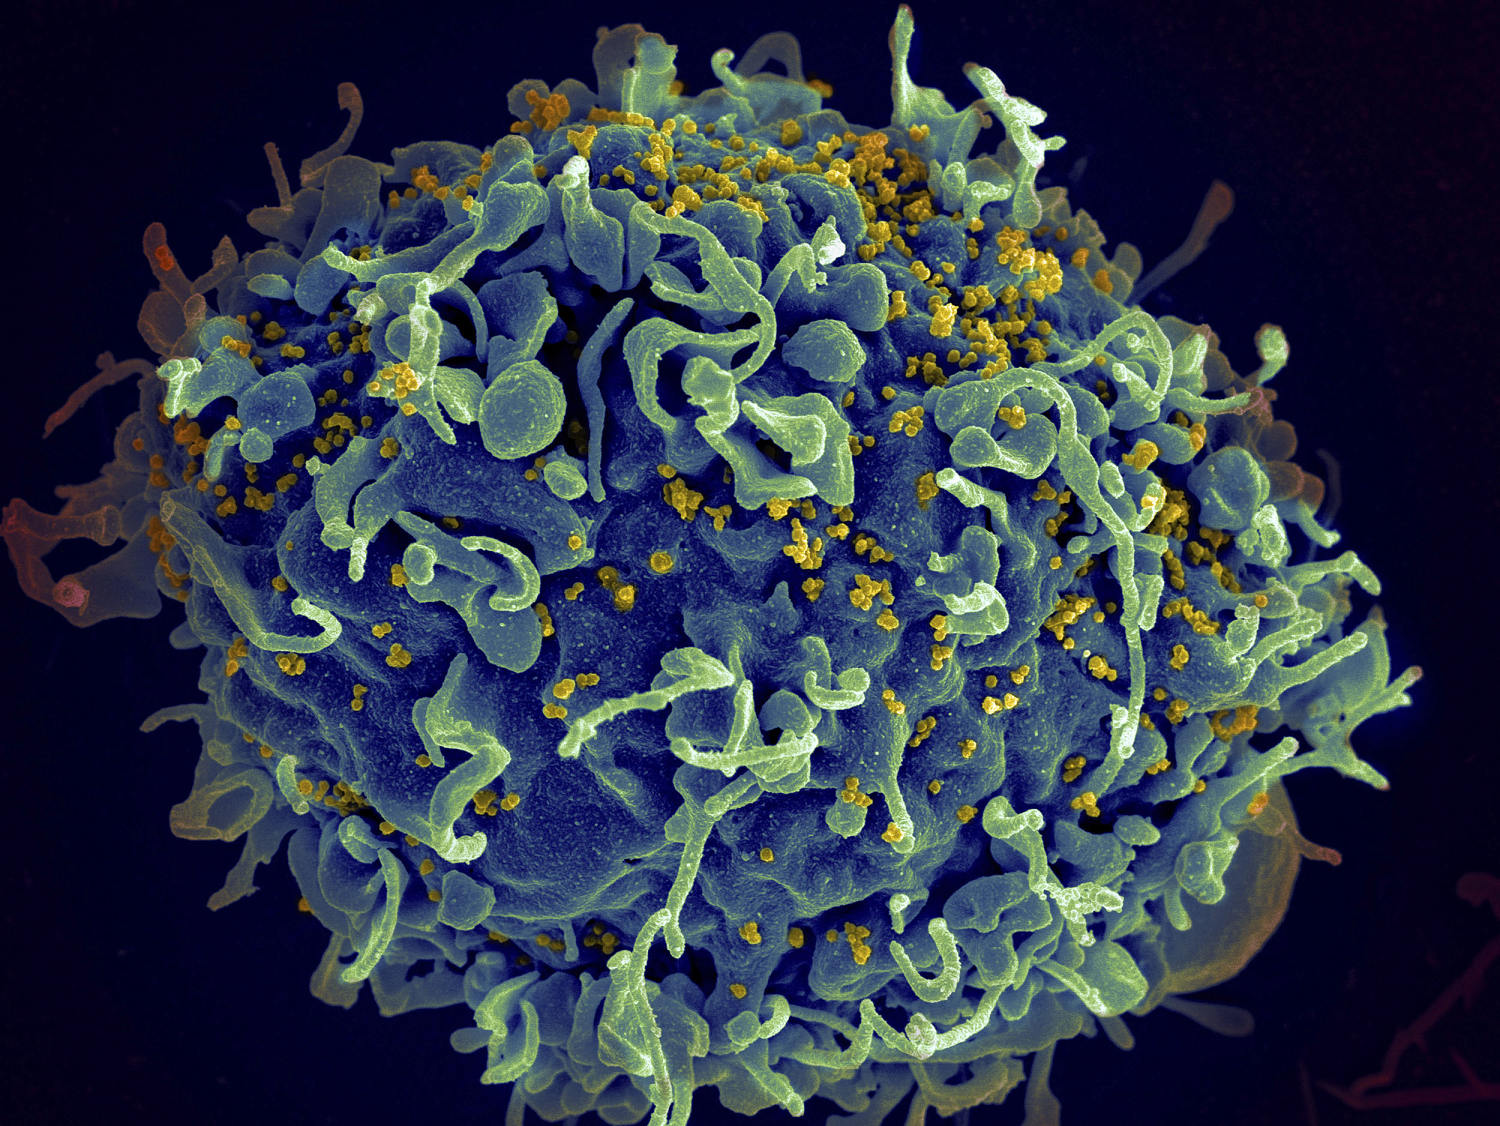 A 7th person with HIV is probably cured after stem cell transplant for leukemia, scientists say